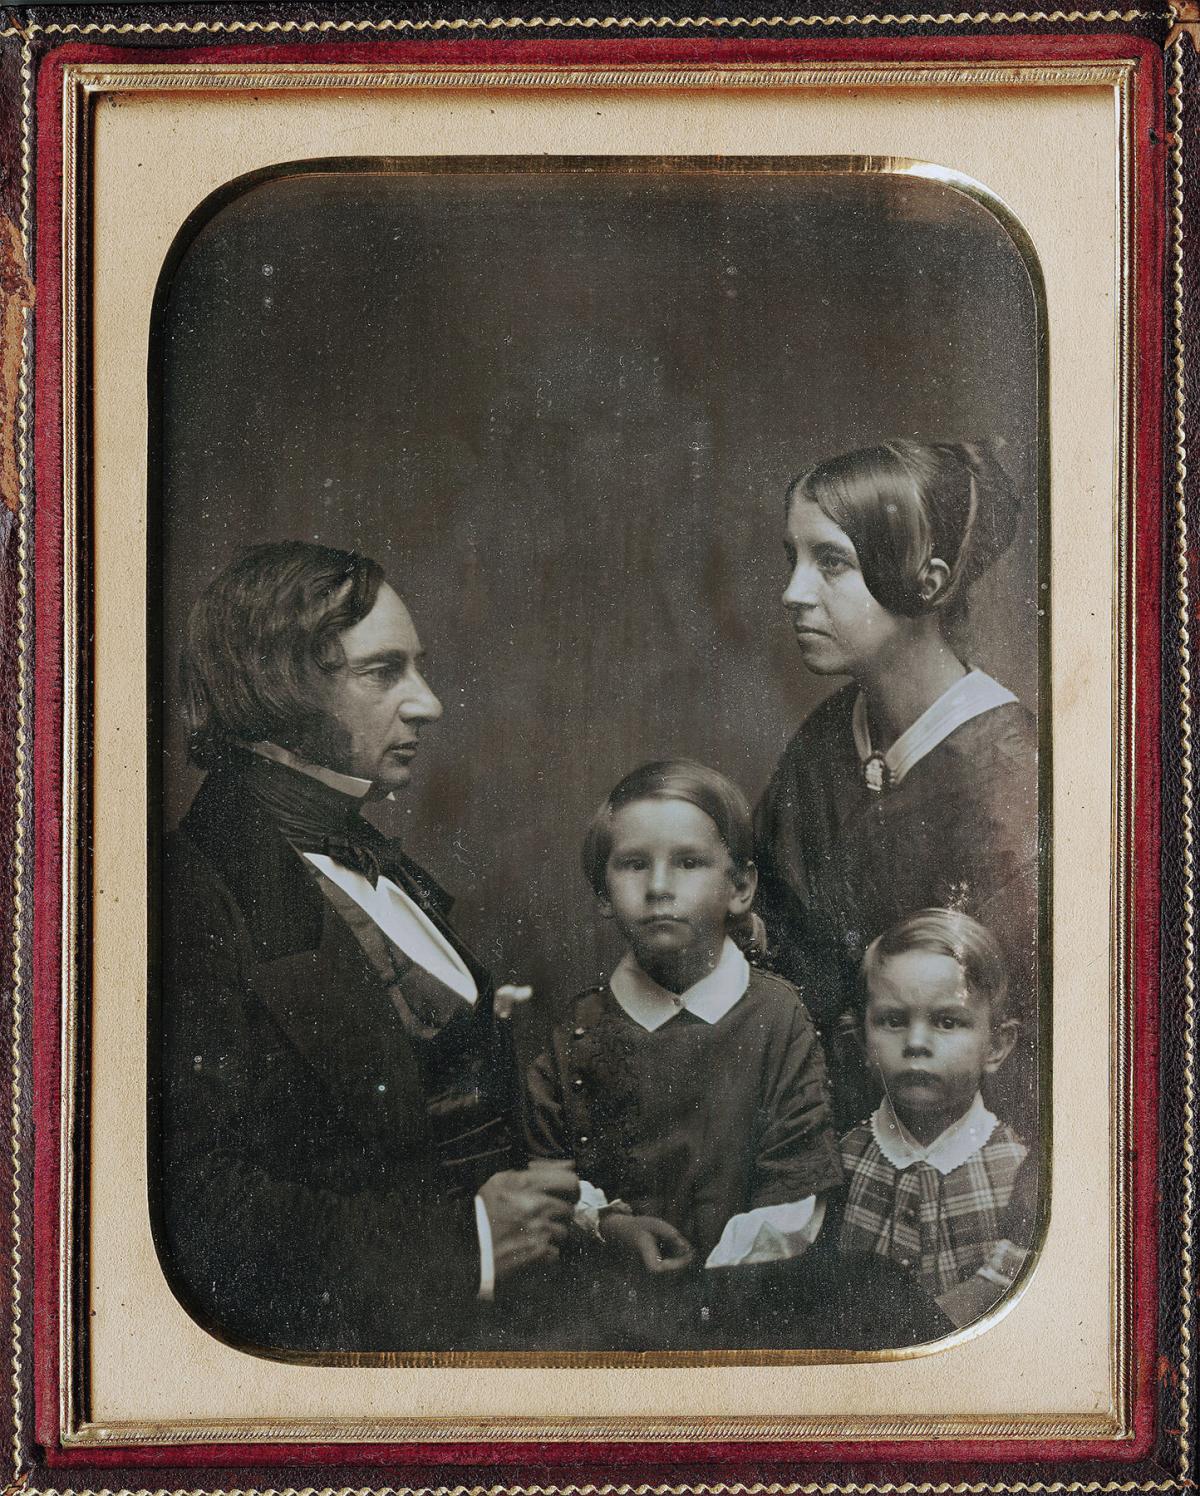 A portrait of the Longfellow family with sons Charles and Ernest.